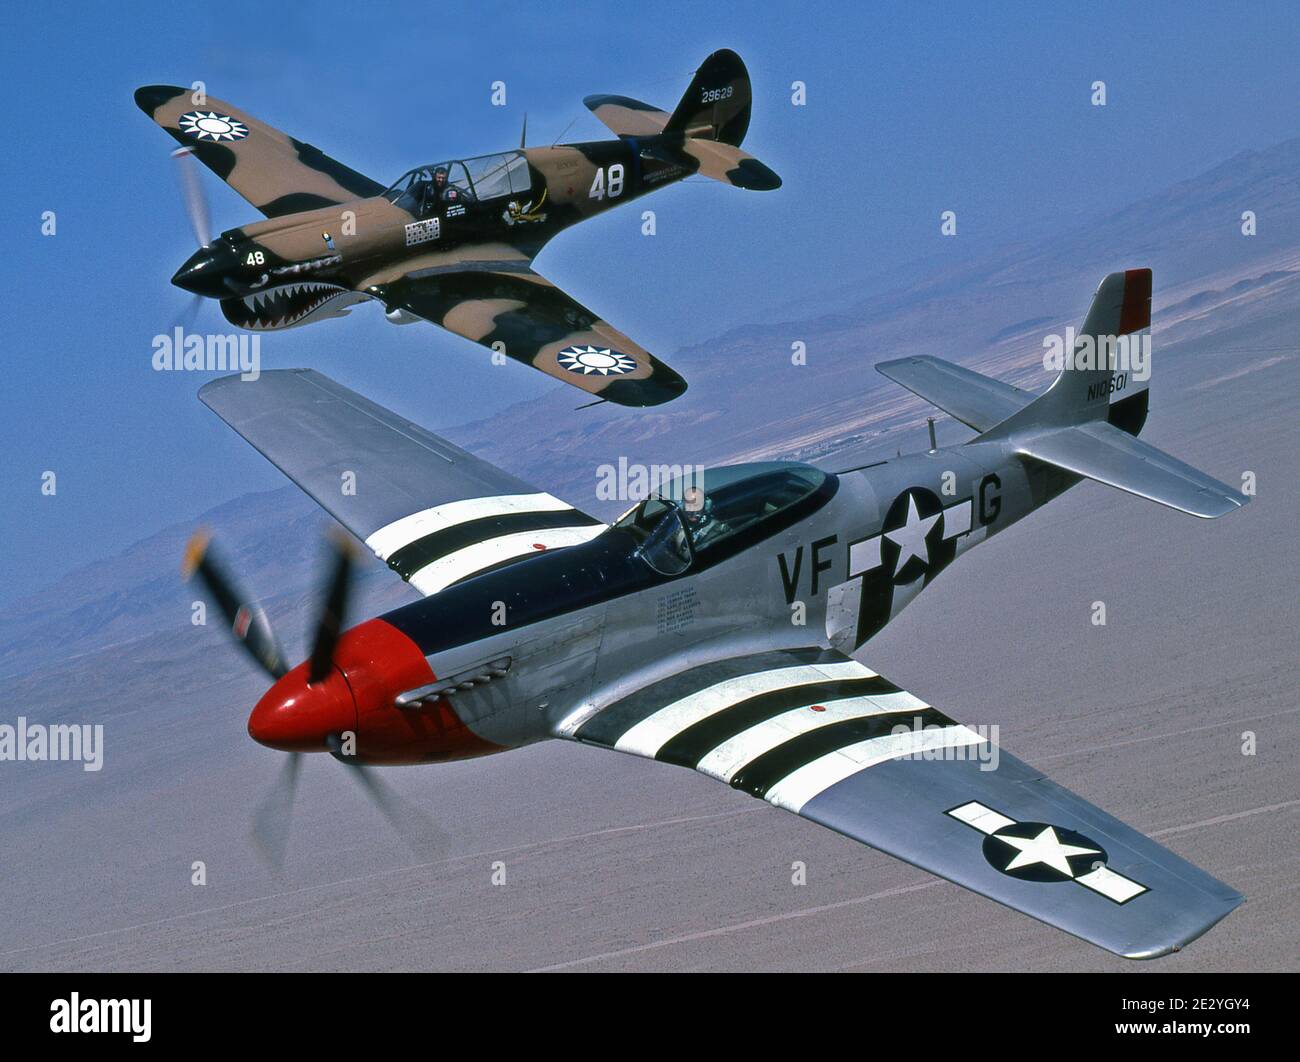 General Chuck Yeager and General Joe Engle flying WWII Fighters. Stock Photo